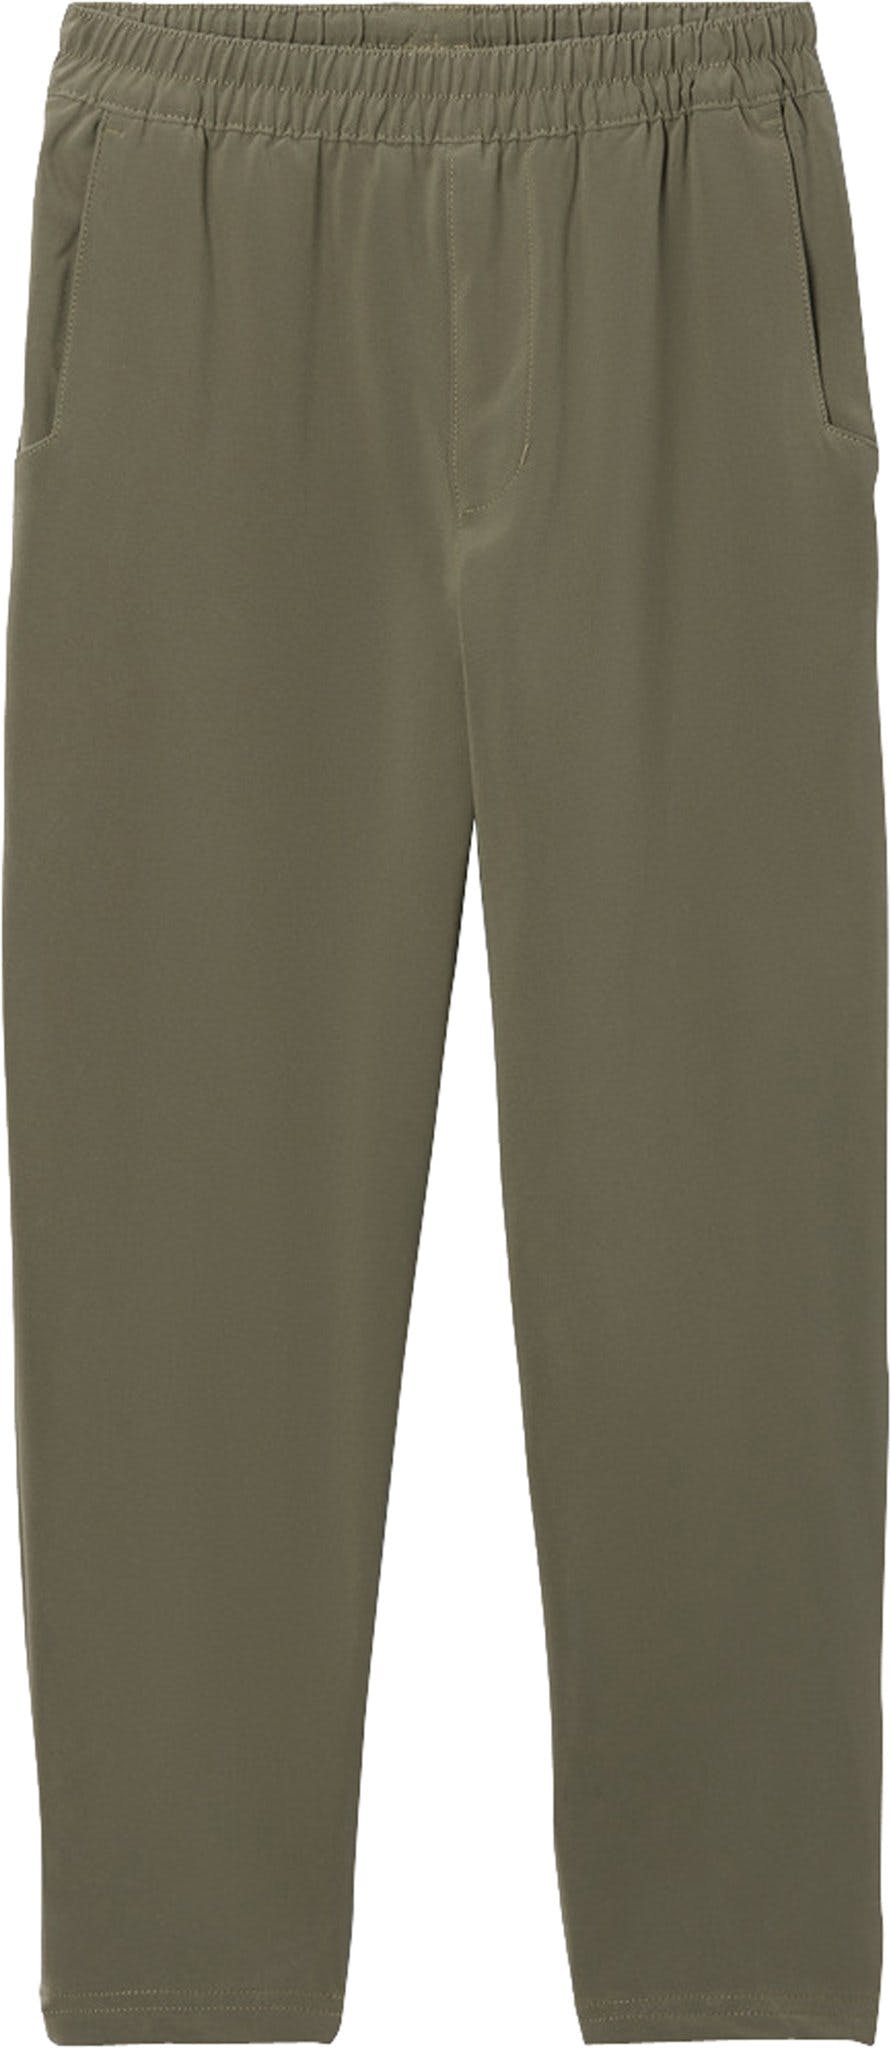 Product image for Columbia Hike Lined Jogger - Boy's